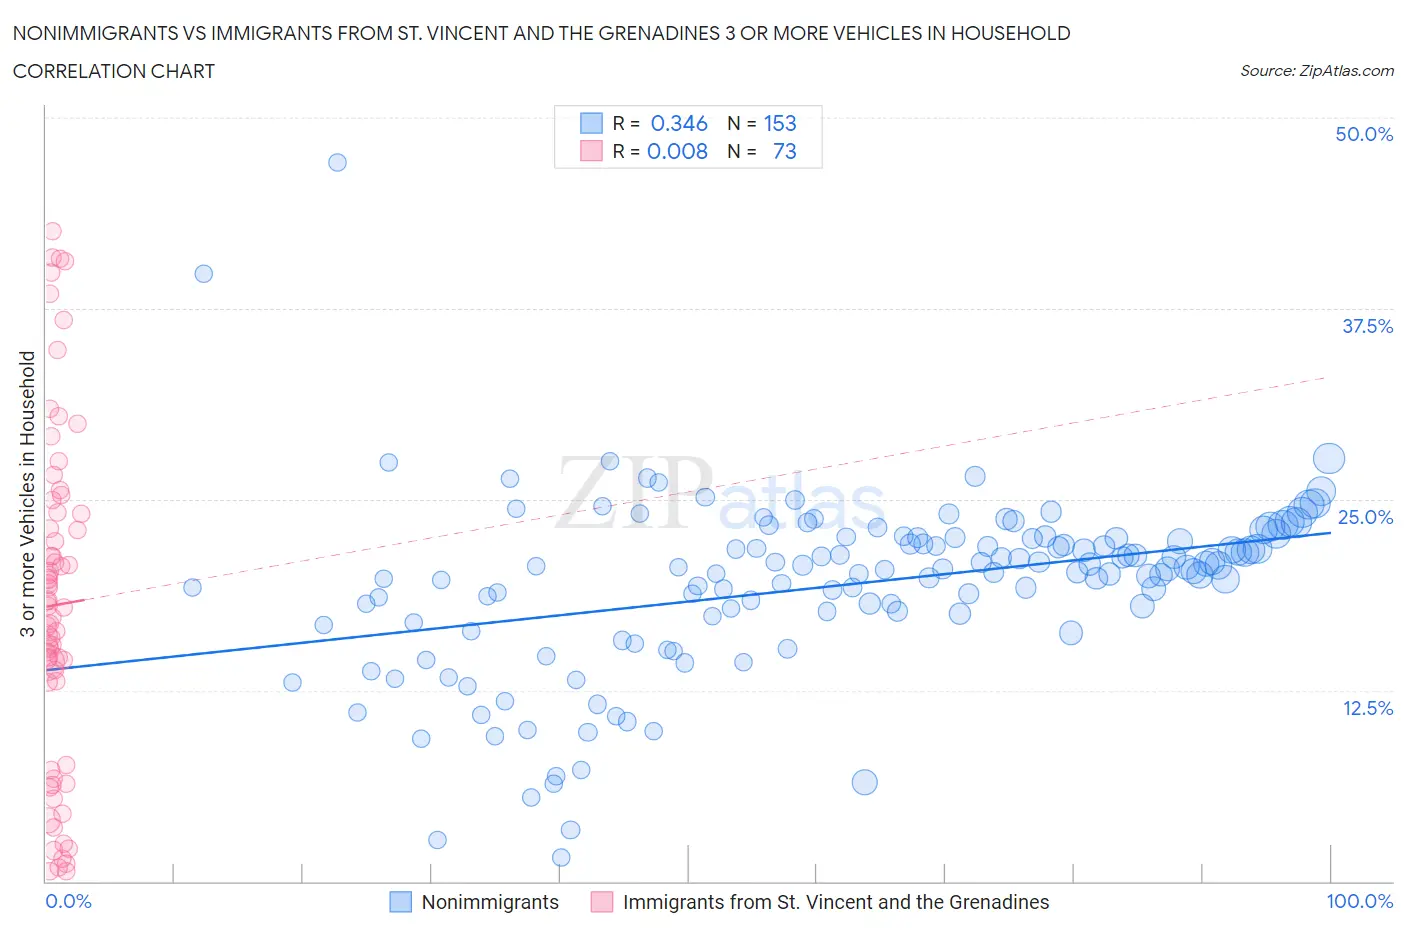 Nonimmigrants vs Immigrants from St. Vincent and the Grenadines 3 or more Vehicles in Household